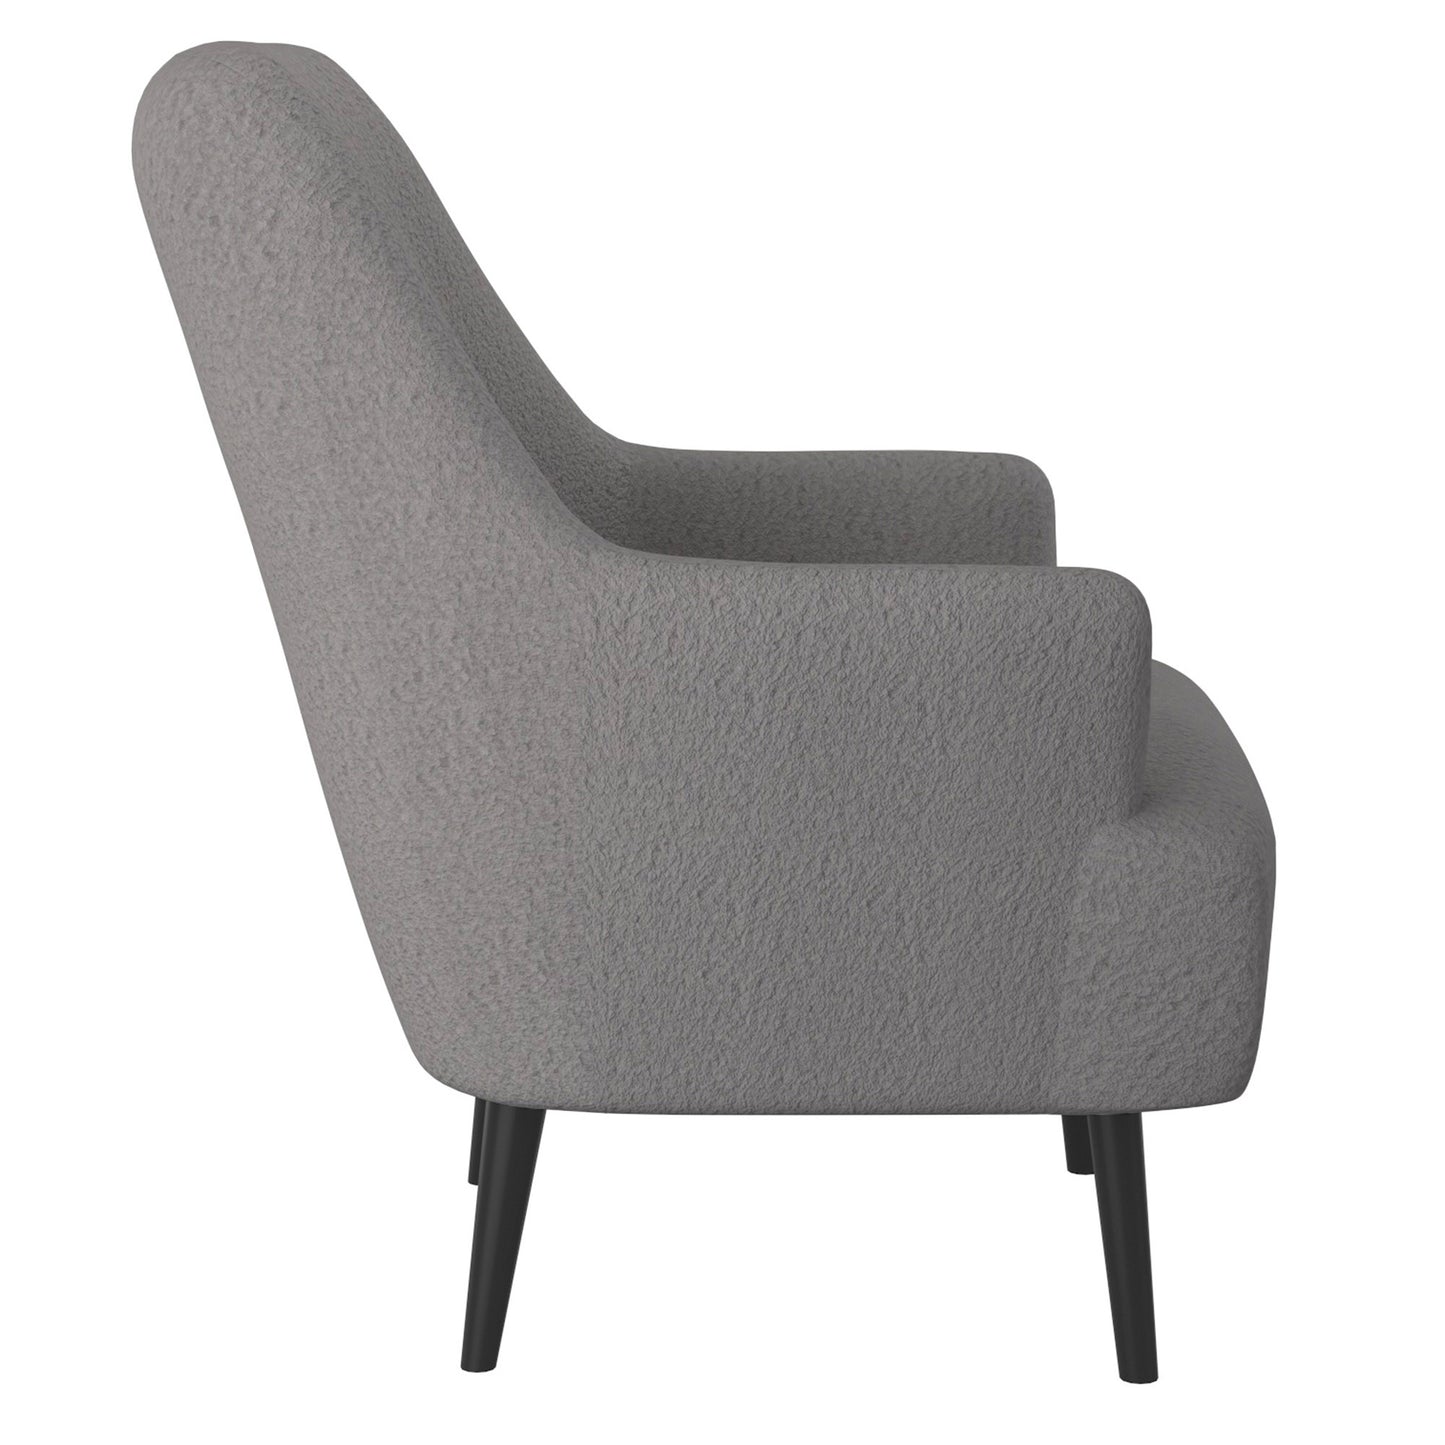 ACCENT CHAIR - GREY - FABRIC - 403-675GY